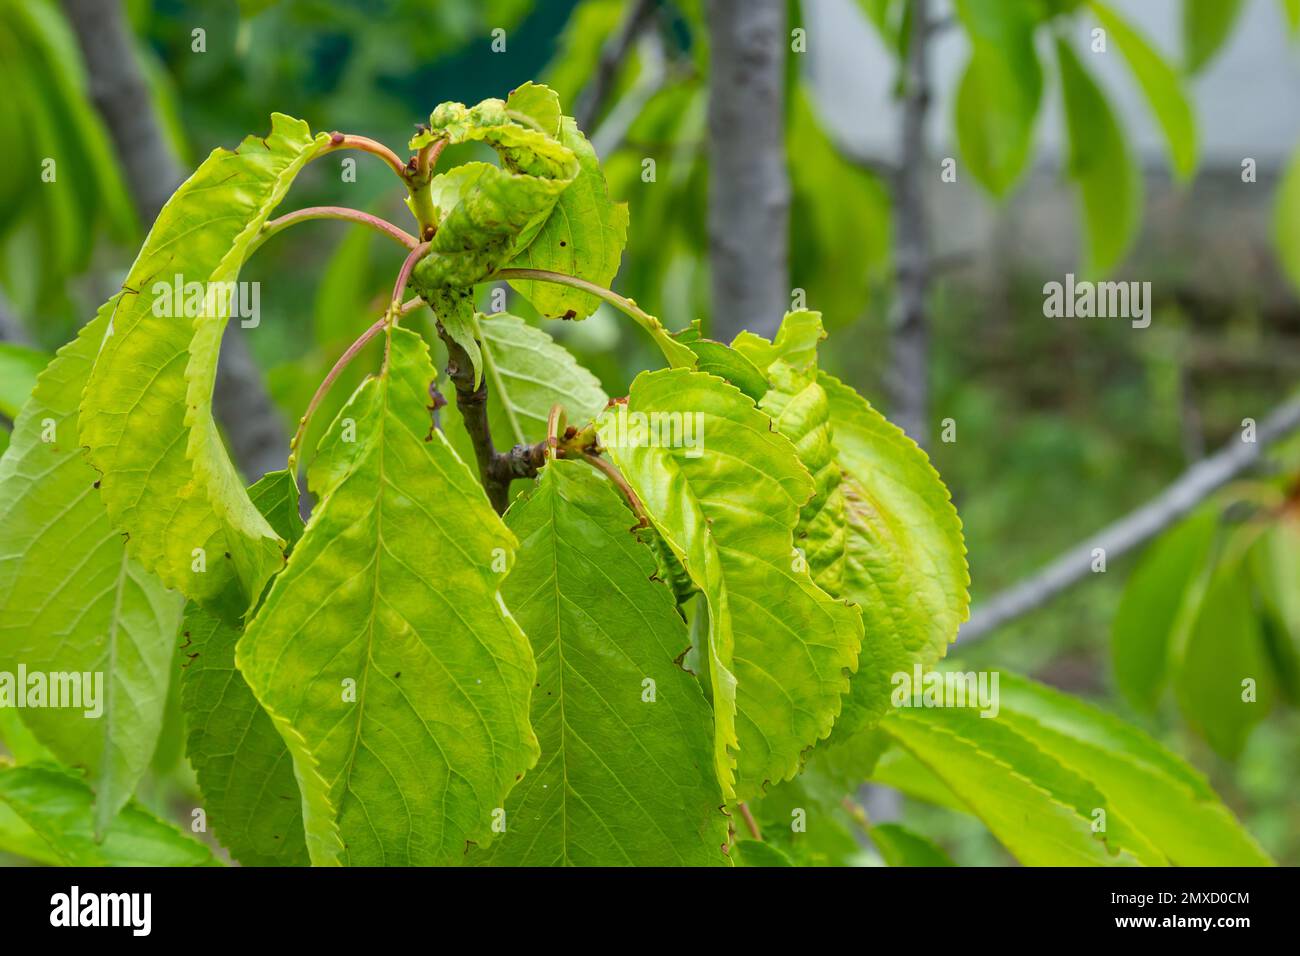 Twisted leaves of cherry. Cherry branch with wrinkled leaves affected by black aphid. Aphids, Aphis schneideri, severe damage from garden pests. Stron Stock Photo